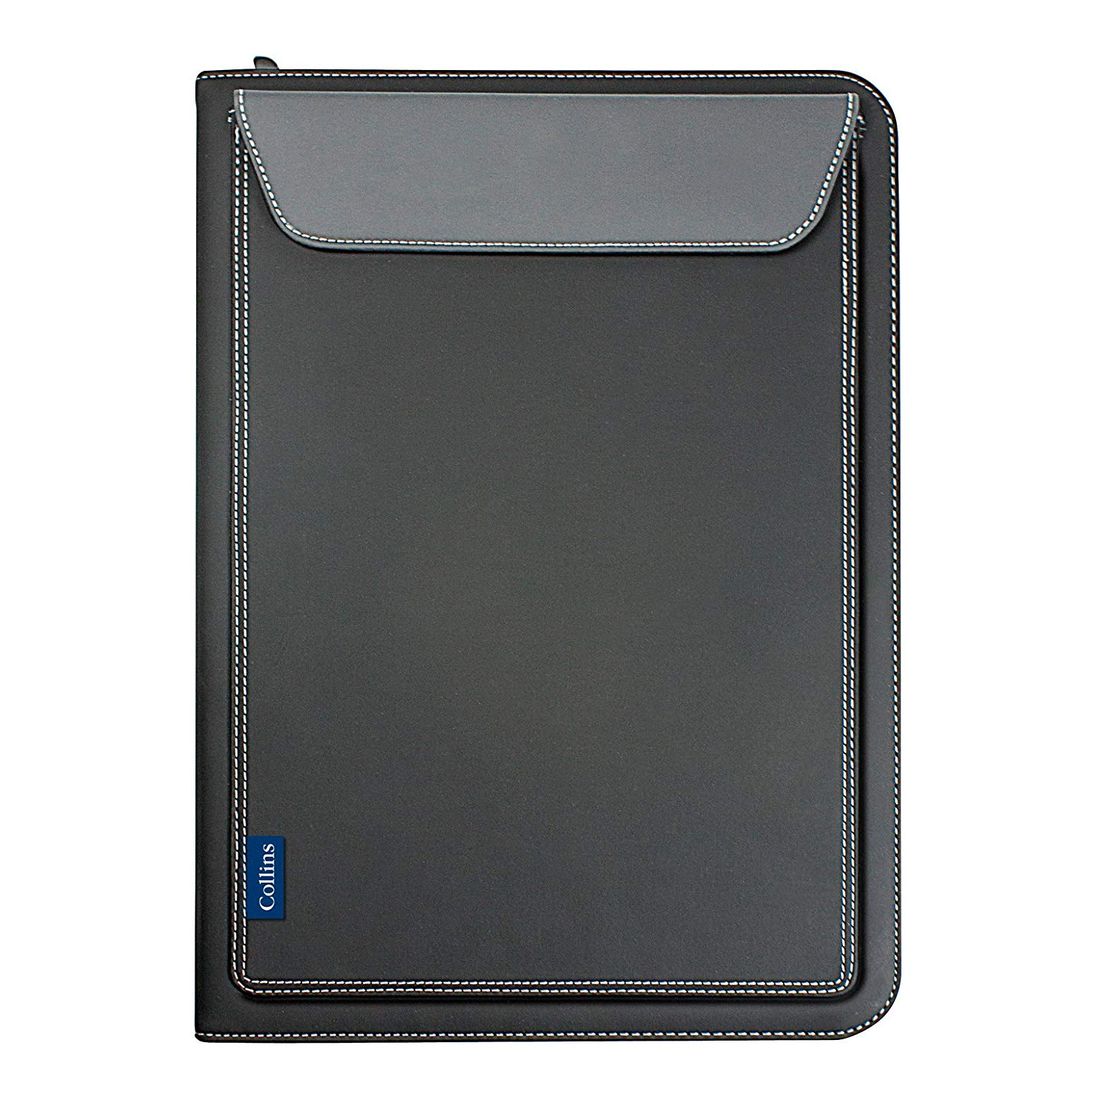 Collins Debden Conference Ringbinder With Pocket Charcoal